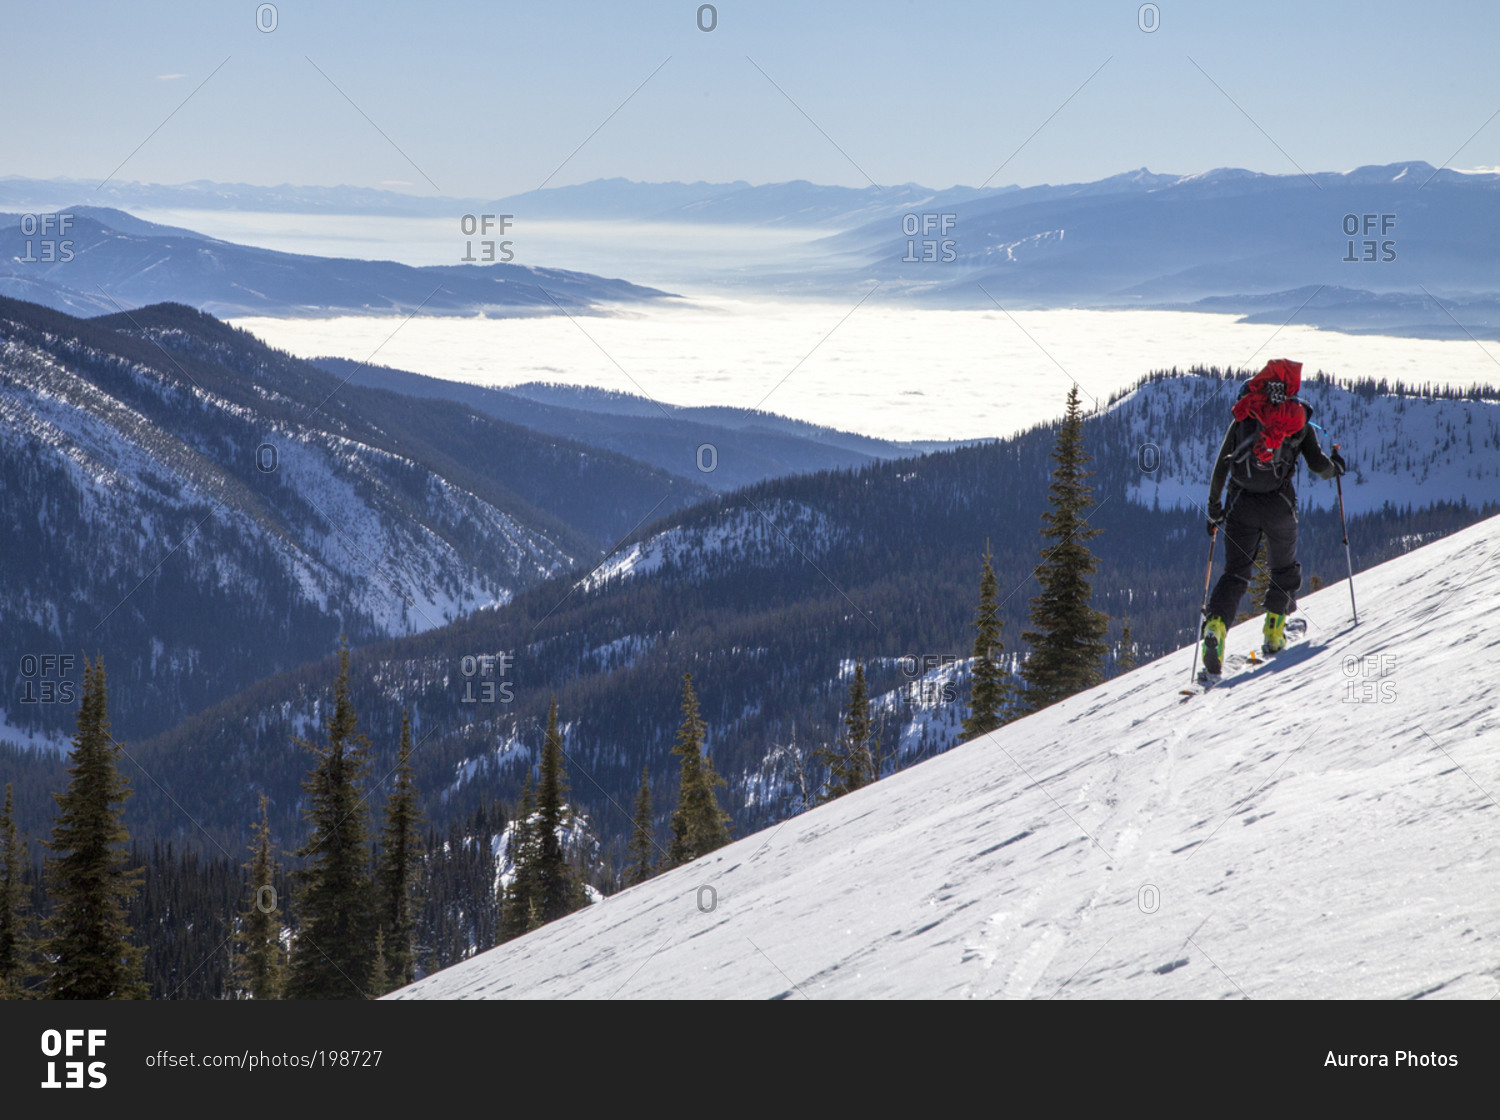 A backcountry skier tours through the Rattlesnake Mountains high above an inversion in the Bitterroot and Missoula Valley, Montana